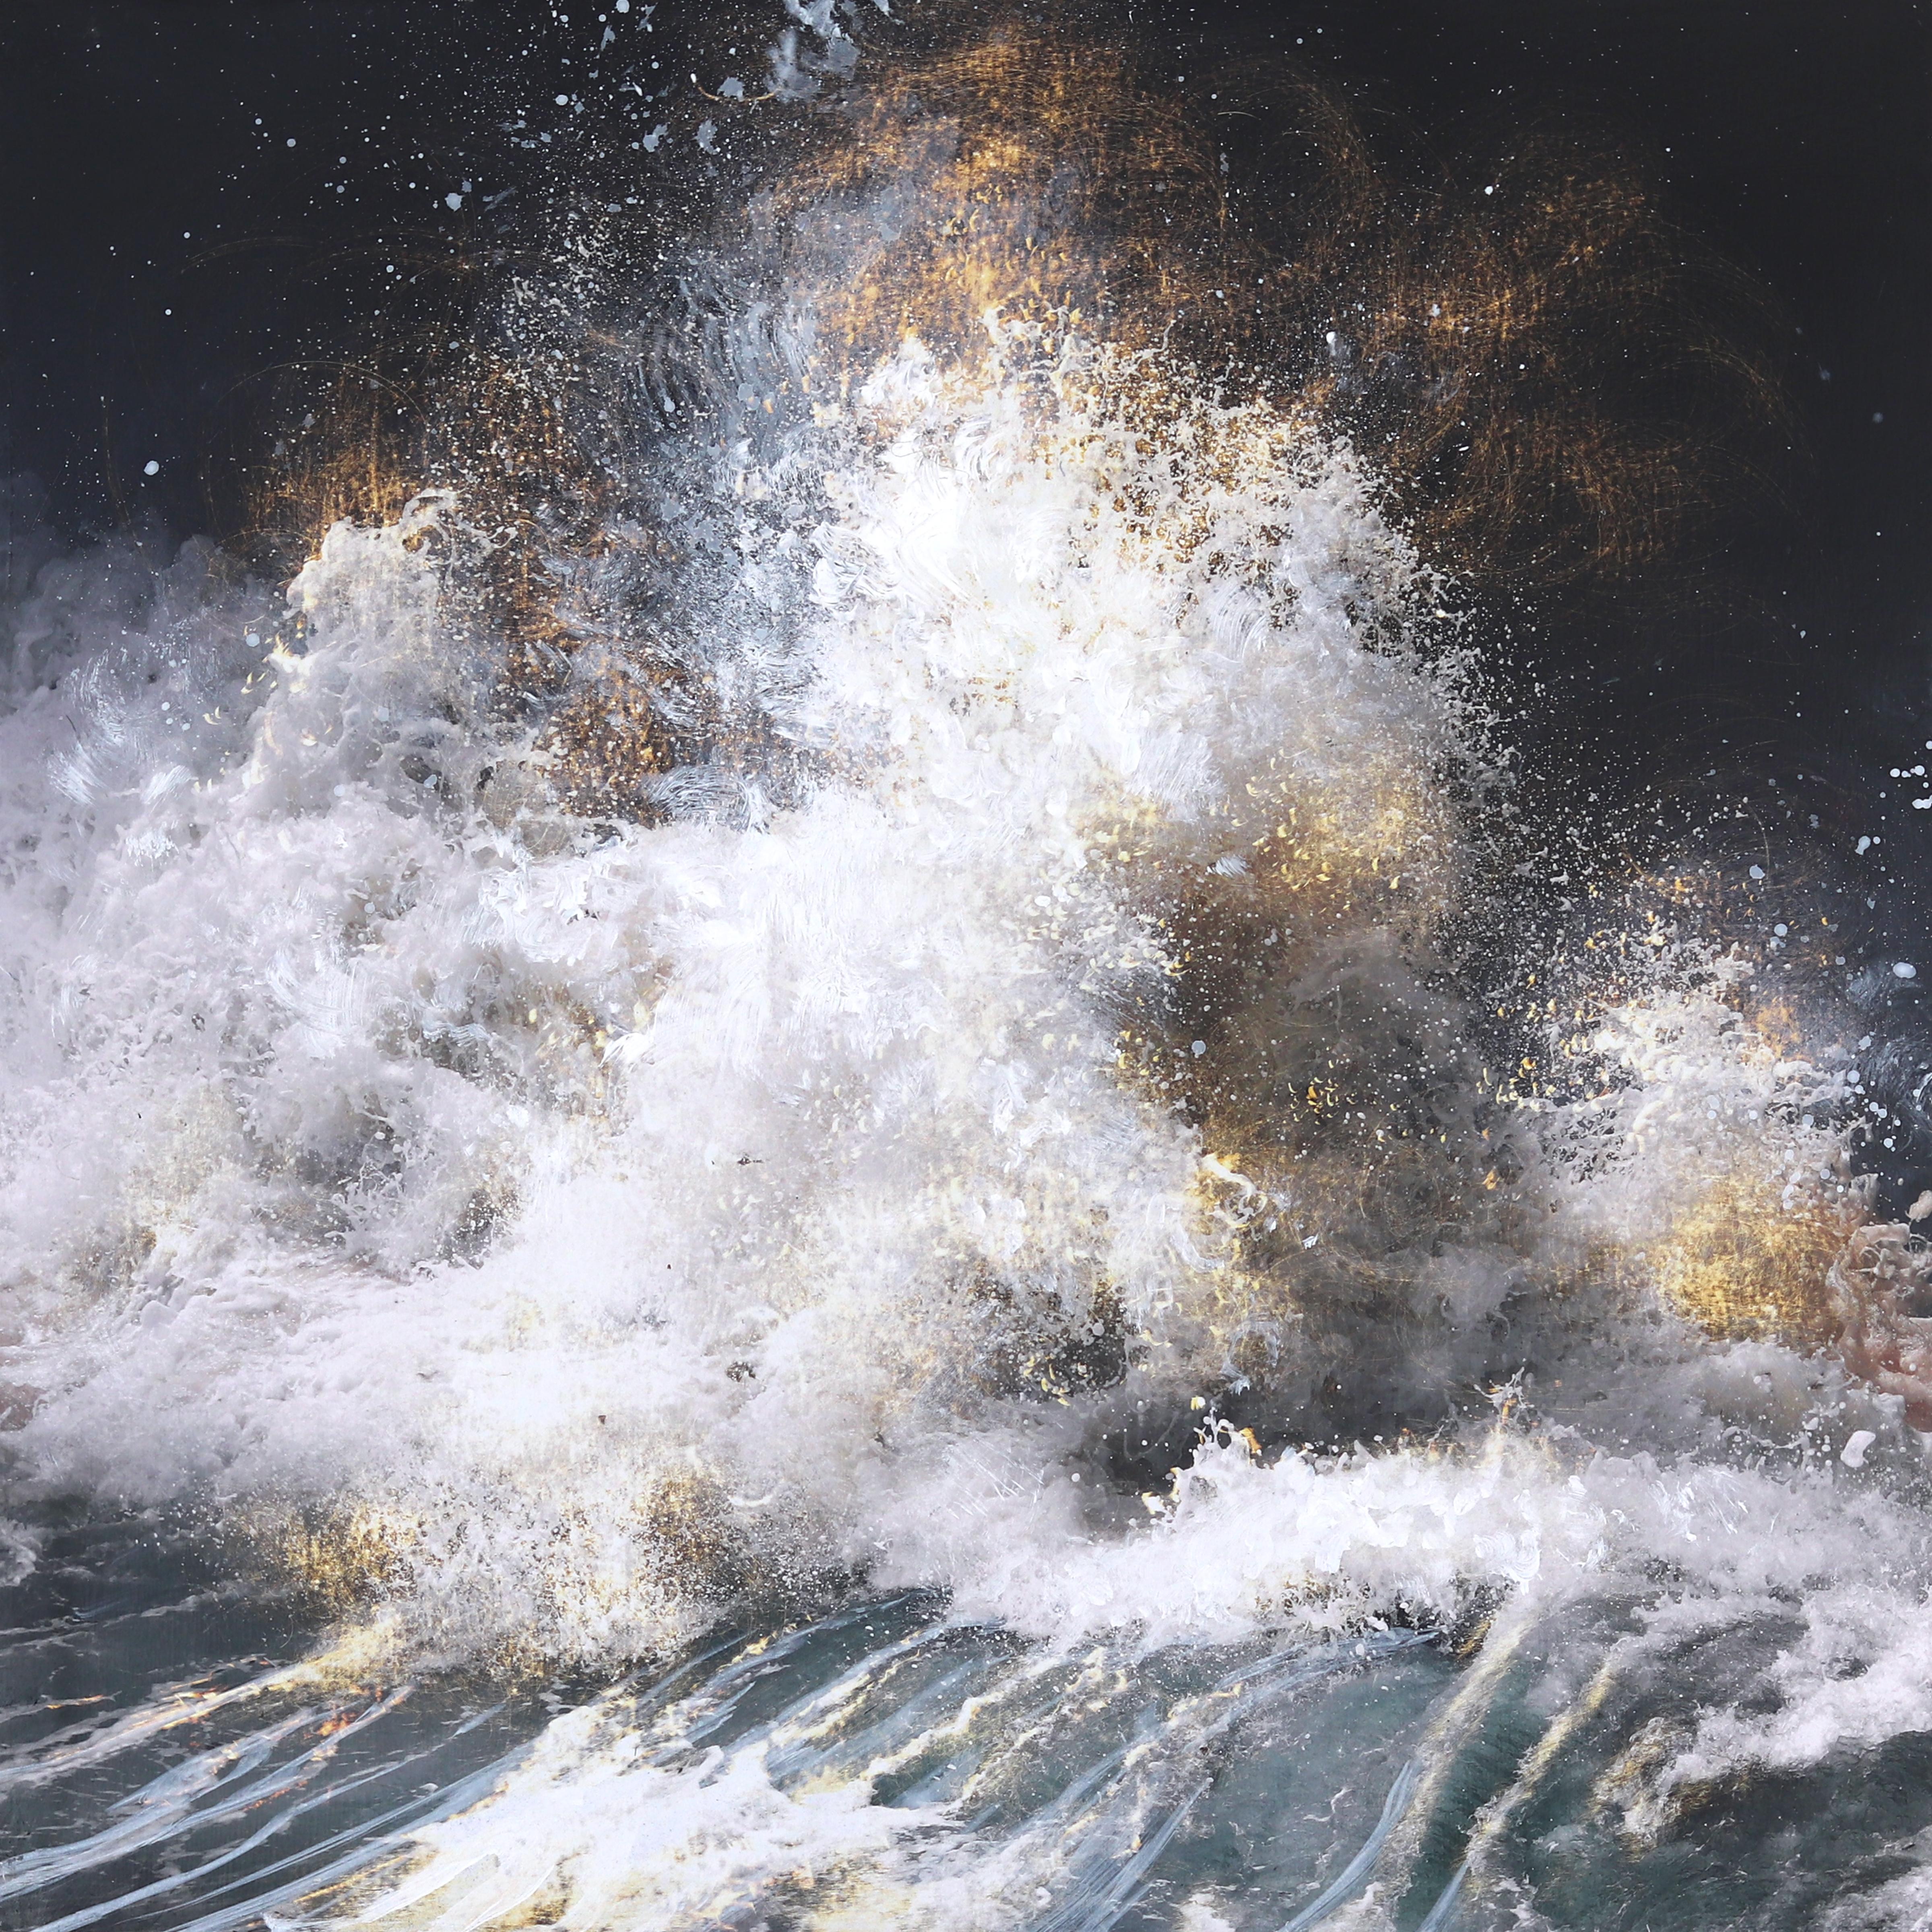 Heart & Soul Opens No. 4 - Photorealistic Painting of Powerful Ocean Waves